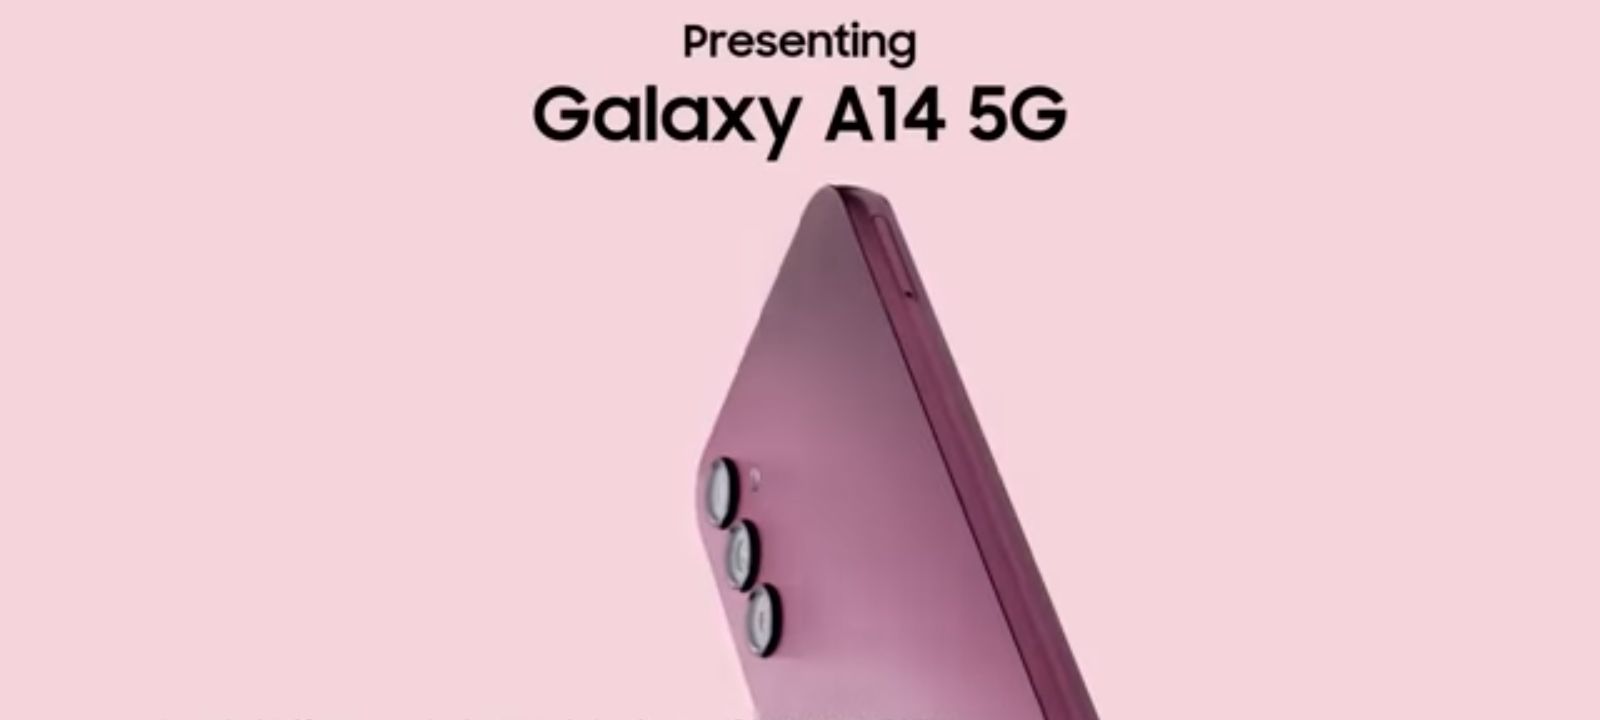 Introducing the new Samsung A14, Blog